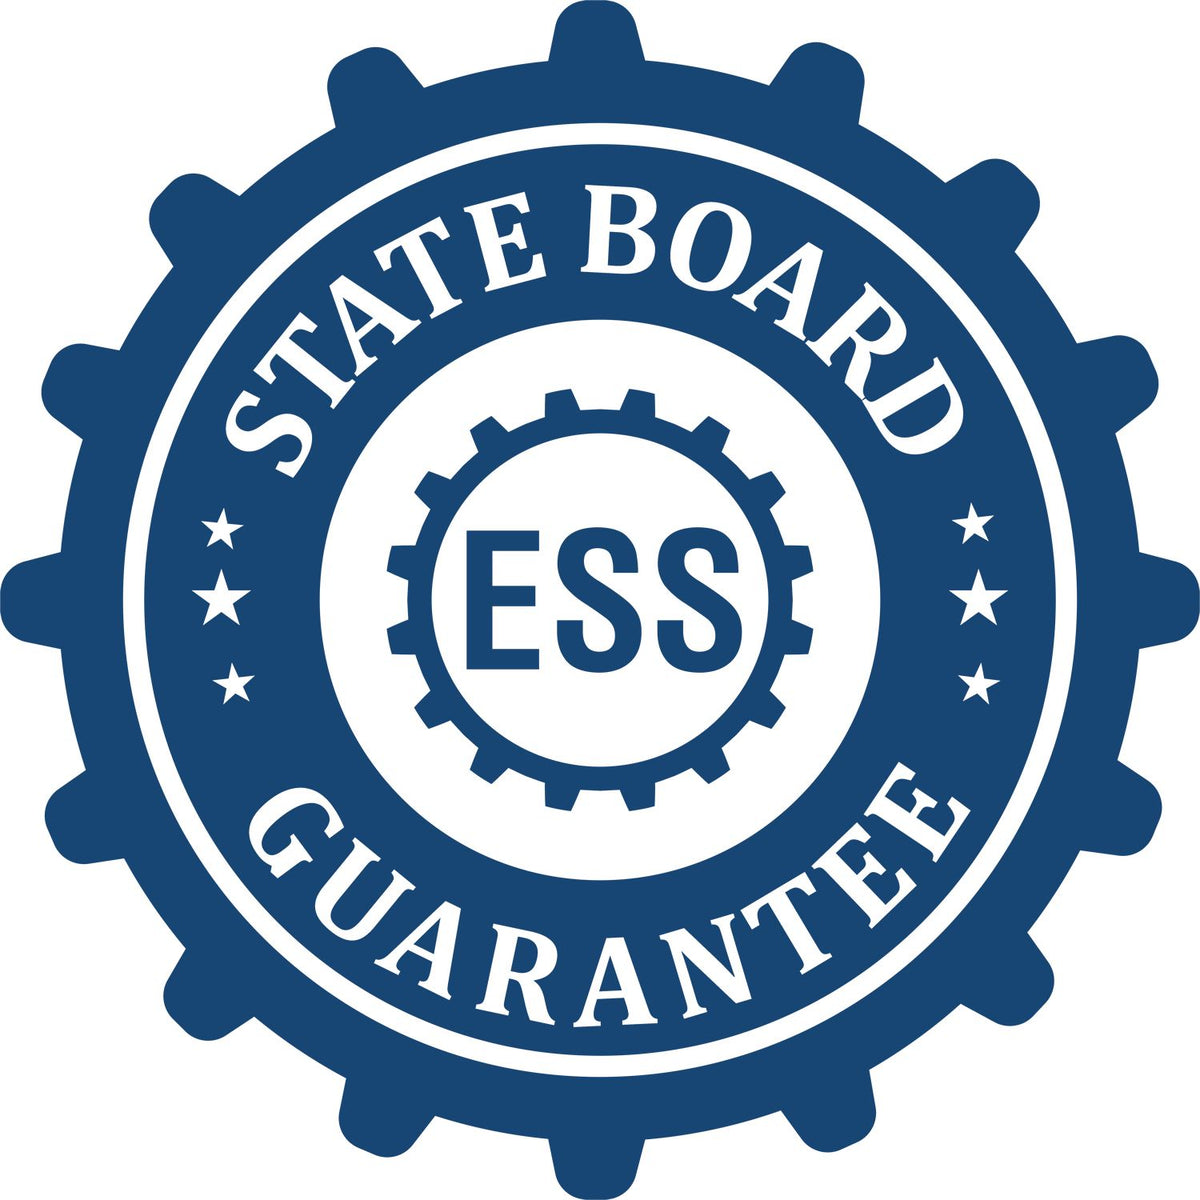 An emblem in a gear shape illustrating a state board guarantee for the Alaska Geologist Desk Seal